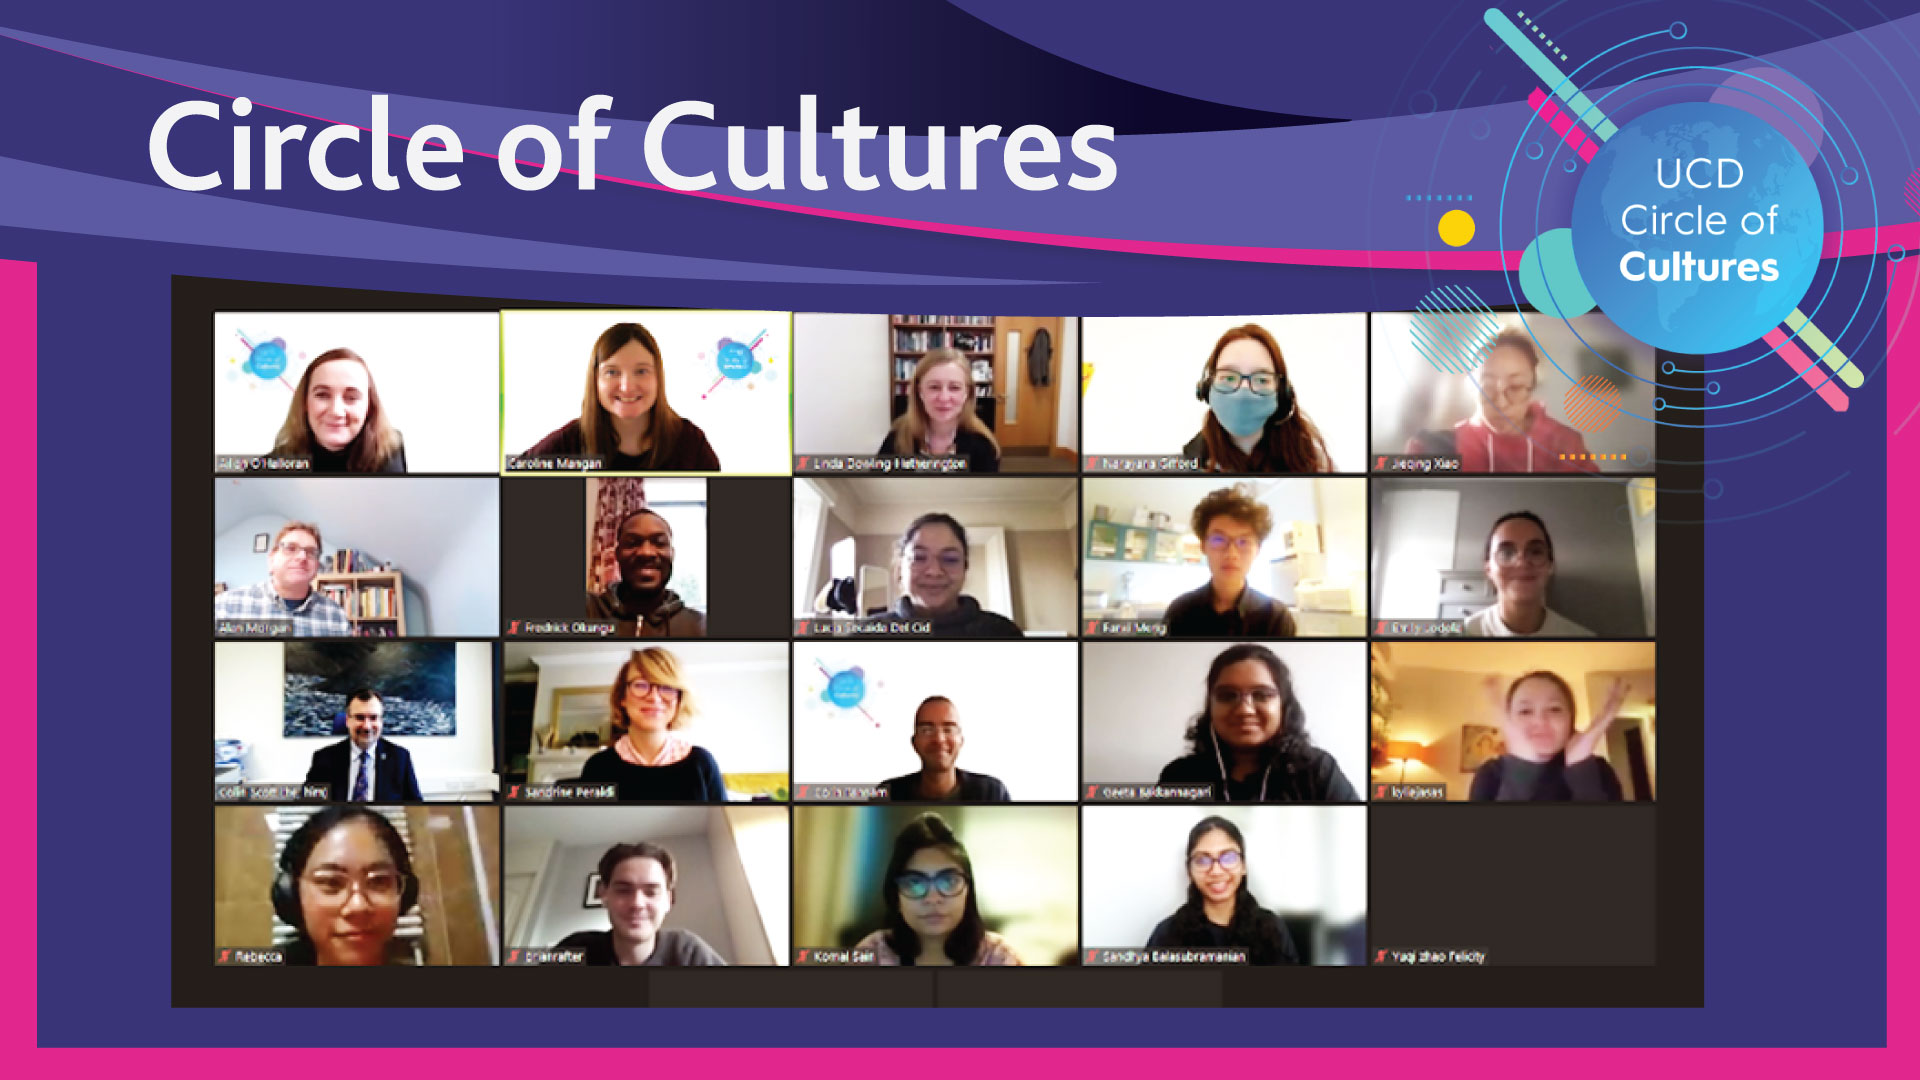 UCD staff and students taking part in a Zoom session for the Circle of Cultures 2021